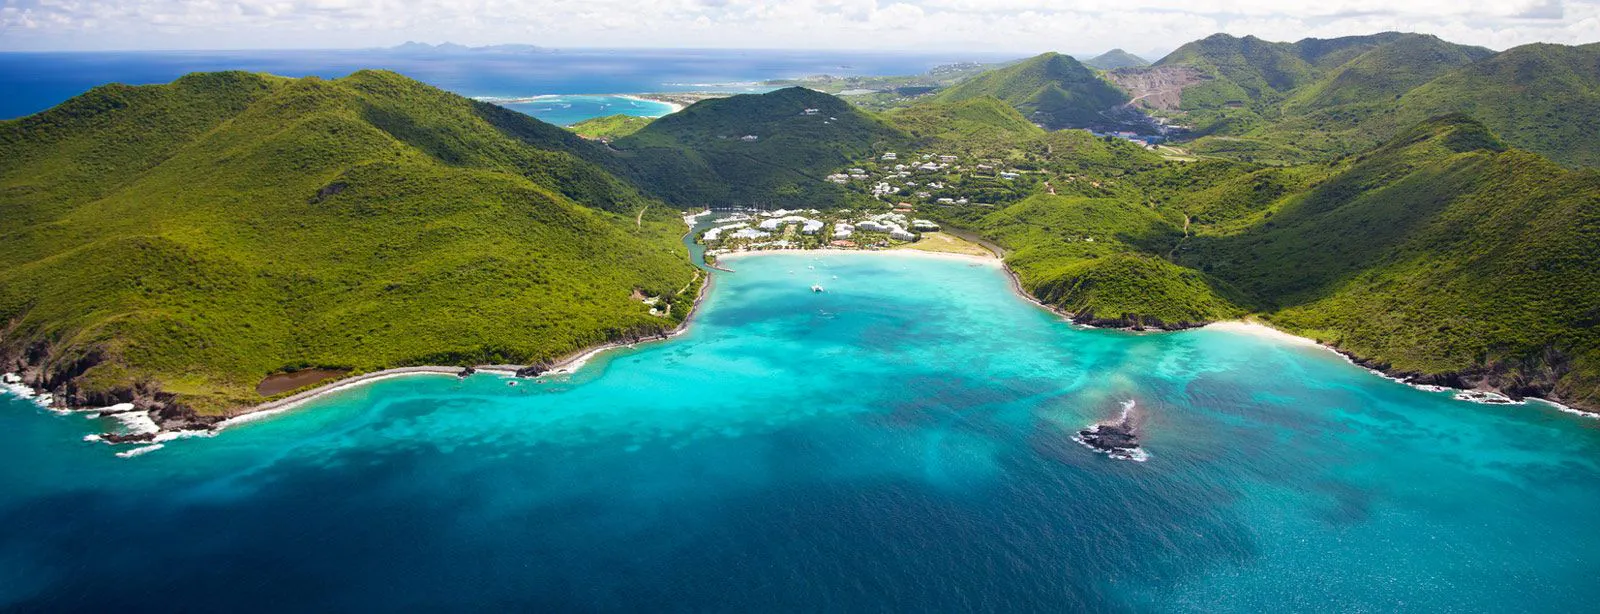 Anse Marcel bay and beach with forest-covered hills around